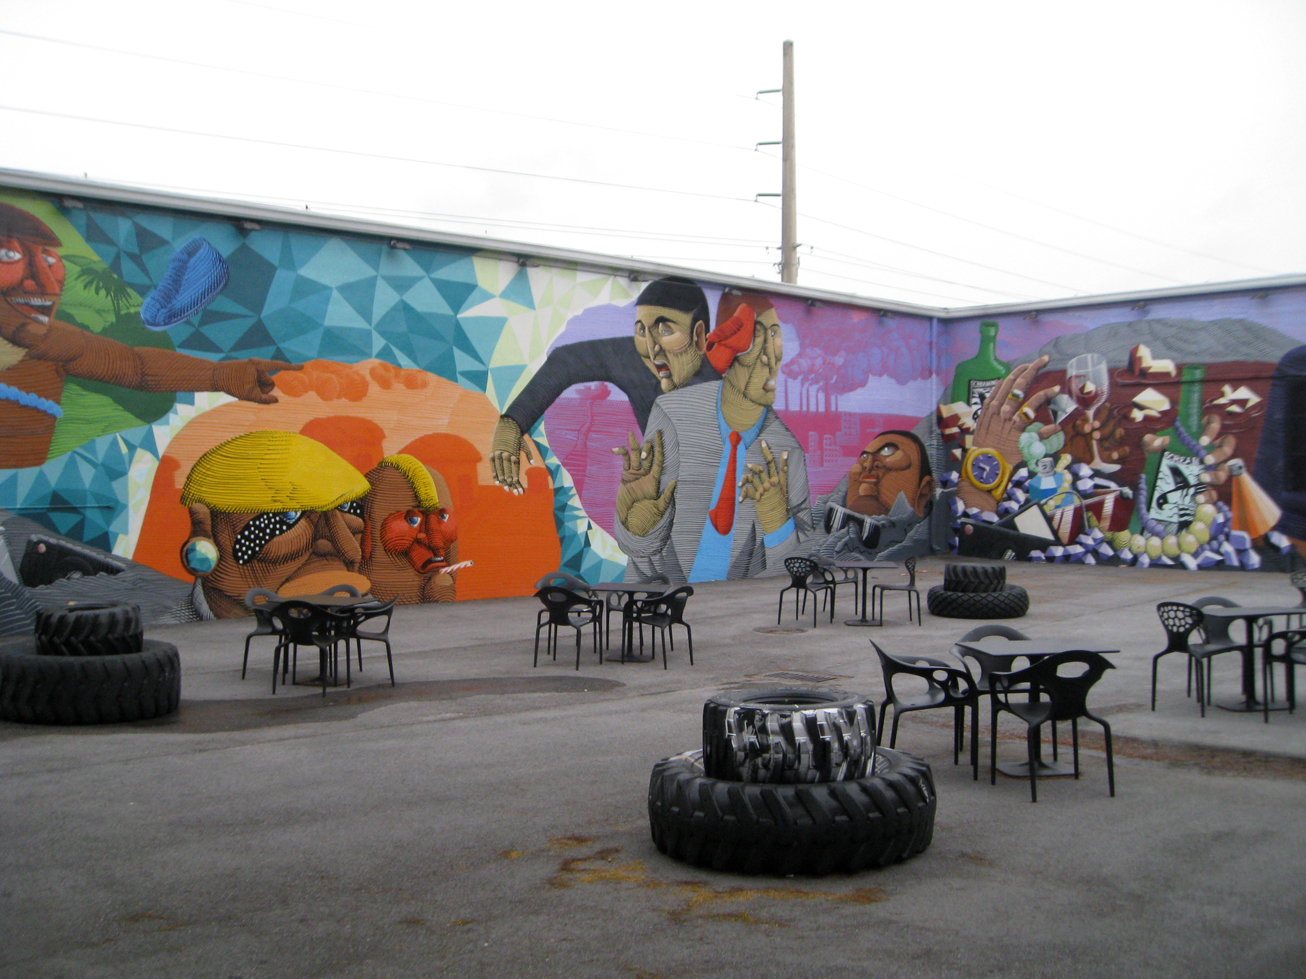 The Wynwood Walls in Miami’s Art District